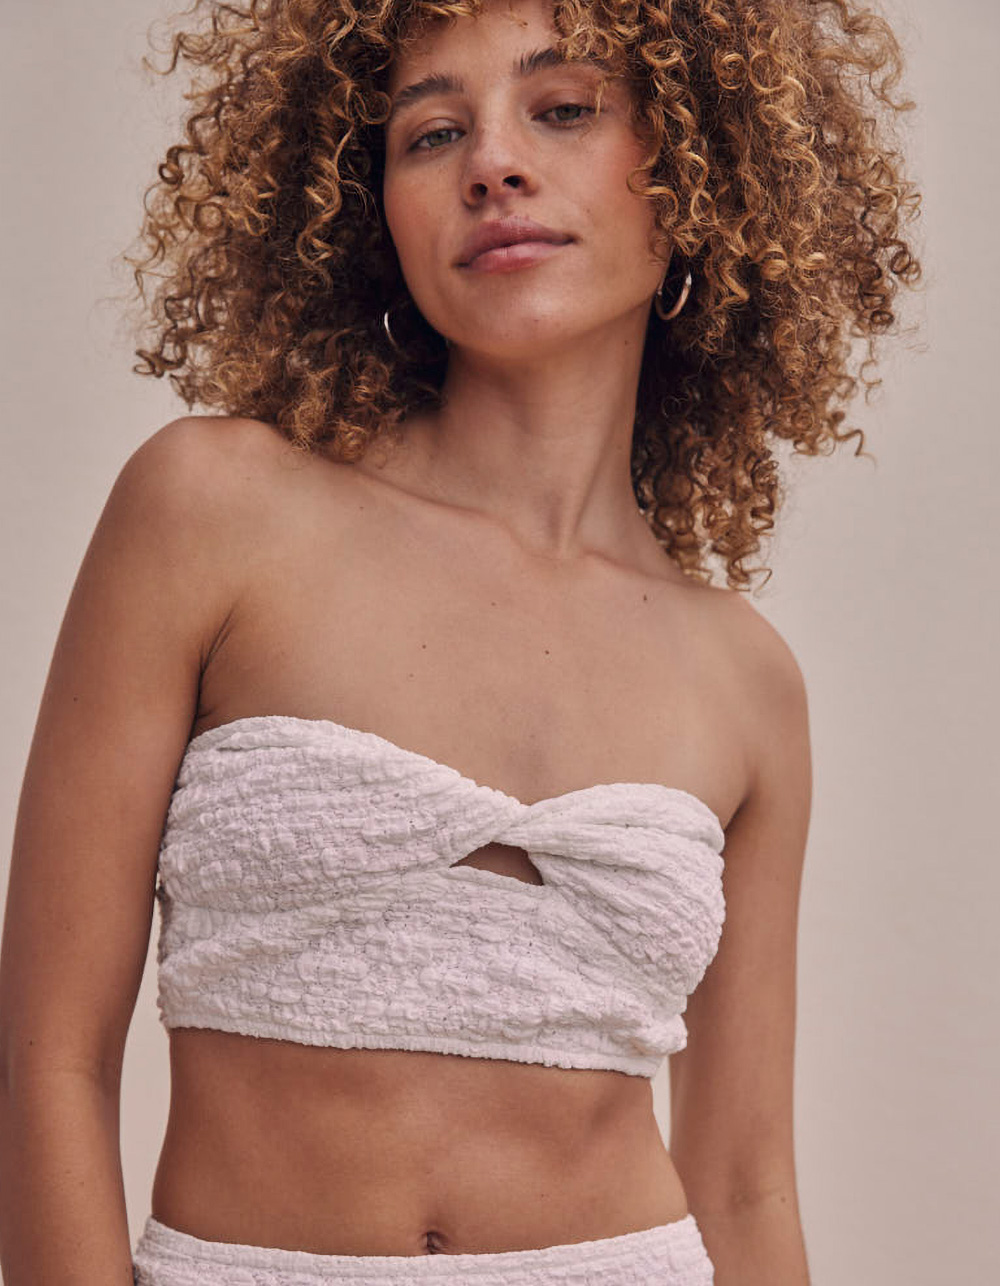 Textured Strapless Top in White